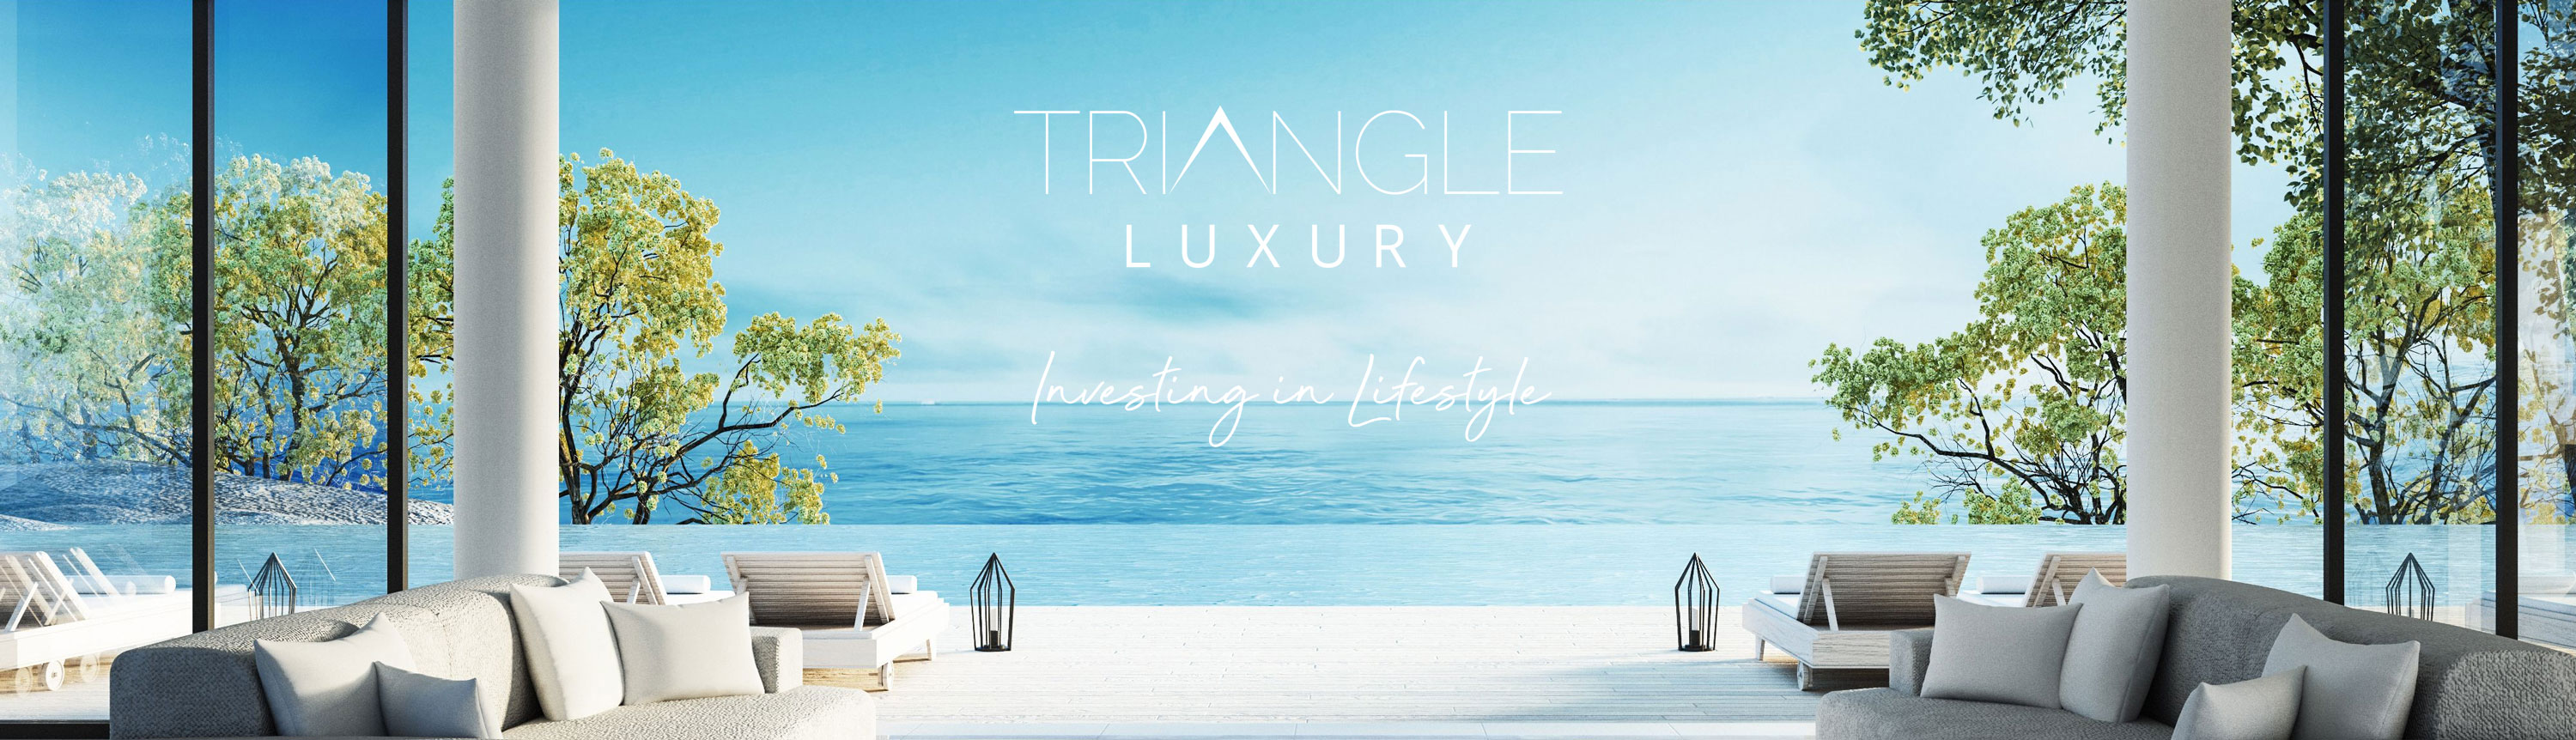 Triangle Luxury - Welcome